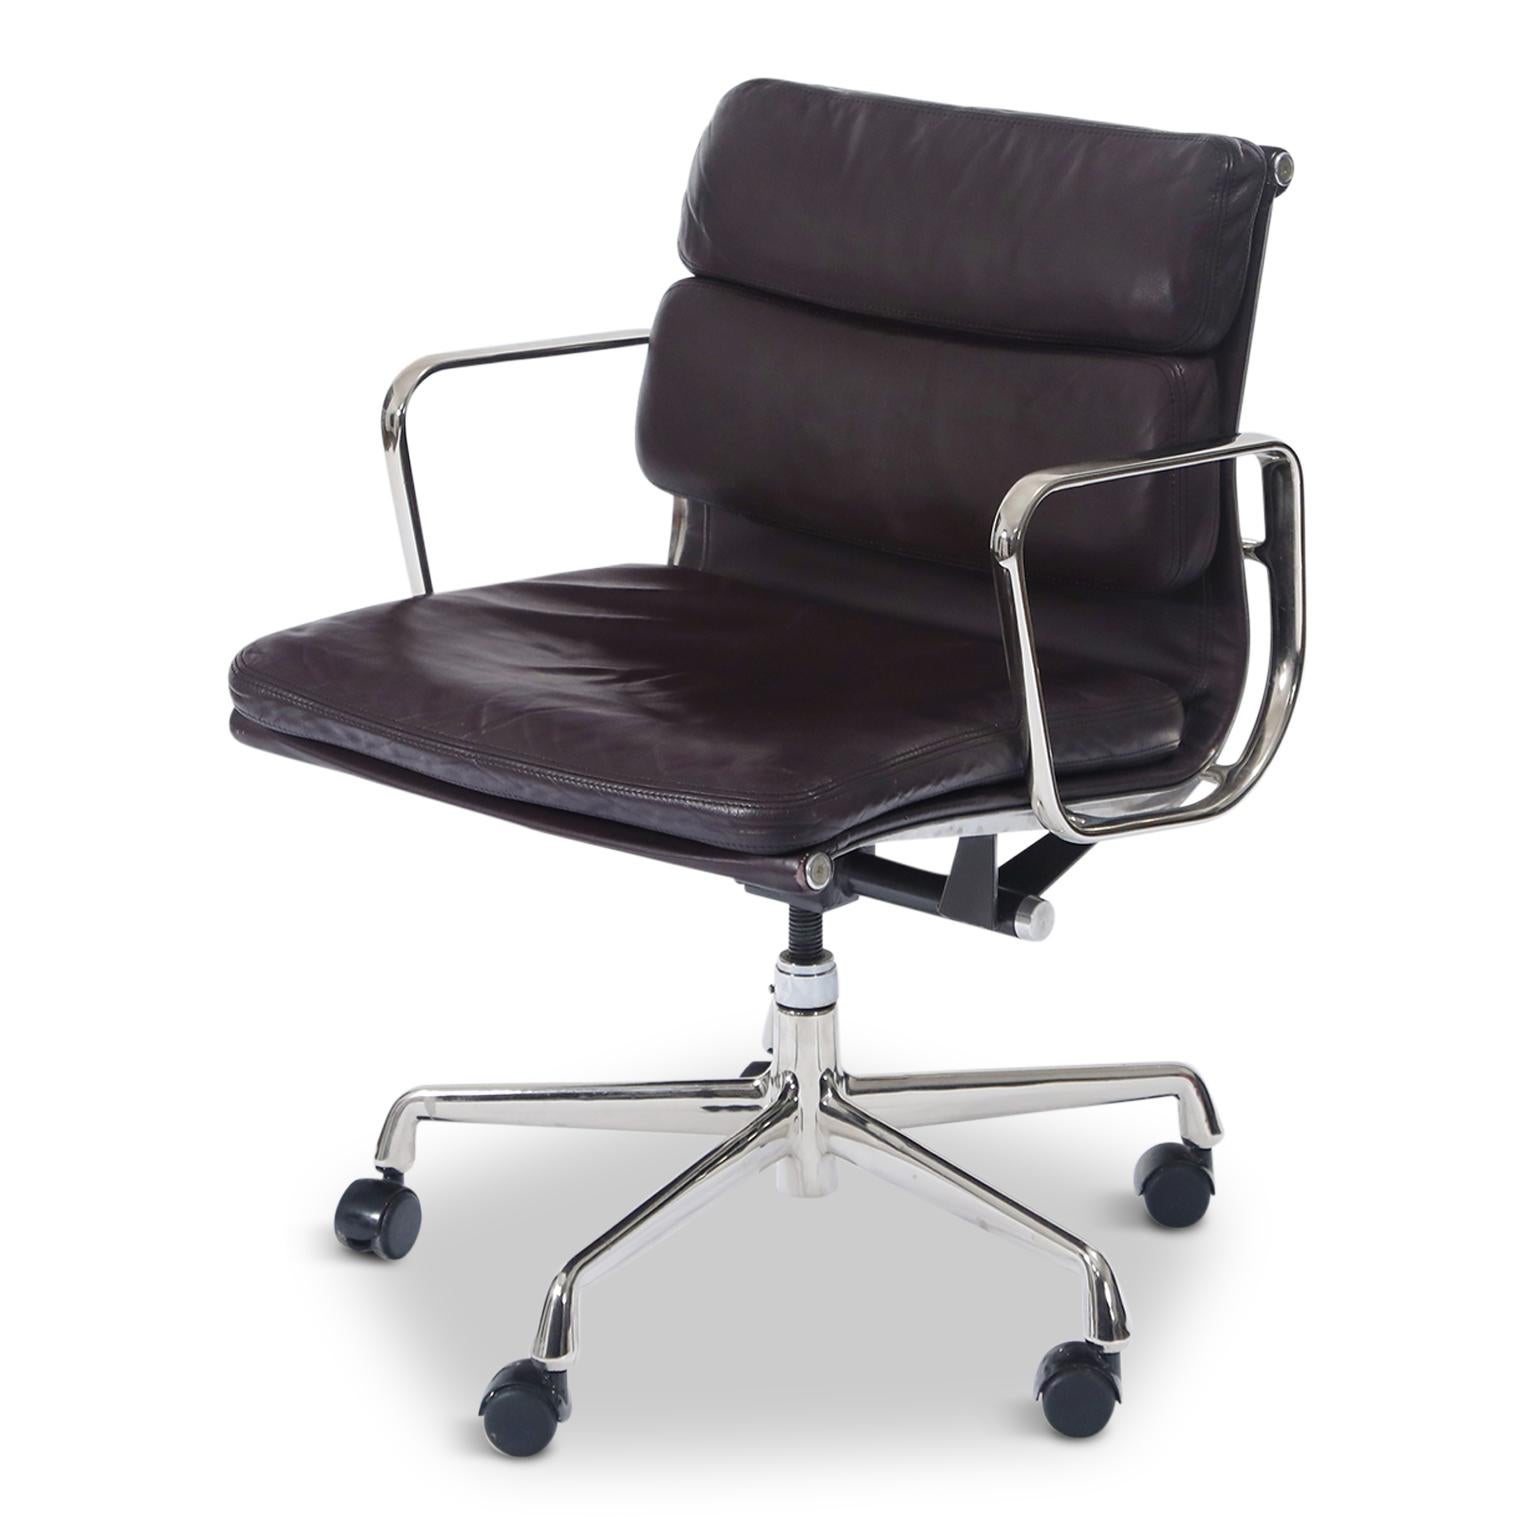 A collectible and sought after leather 'Soft Pad' Management Desk chair from the Aluminum Group line, designed by Charles and Ray Eames for Herman Miller. Featuring its original vintage Auburgine color leather upholstery over five-star aluminum base